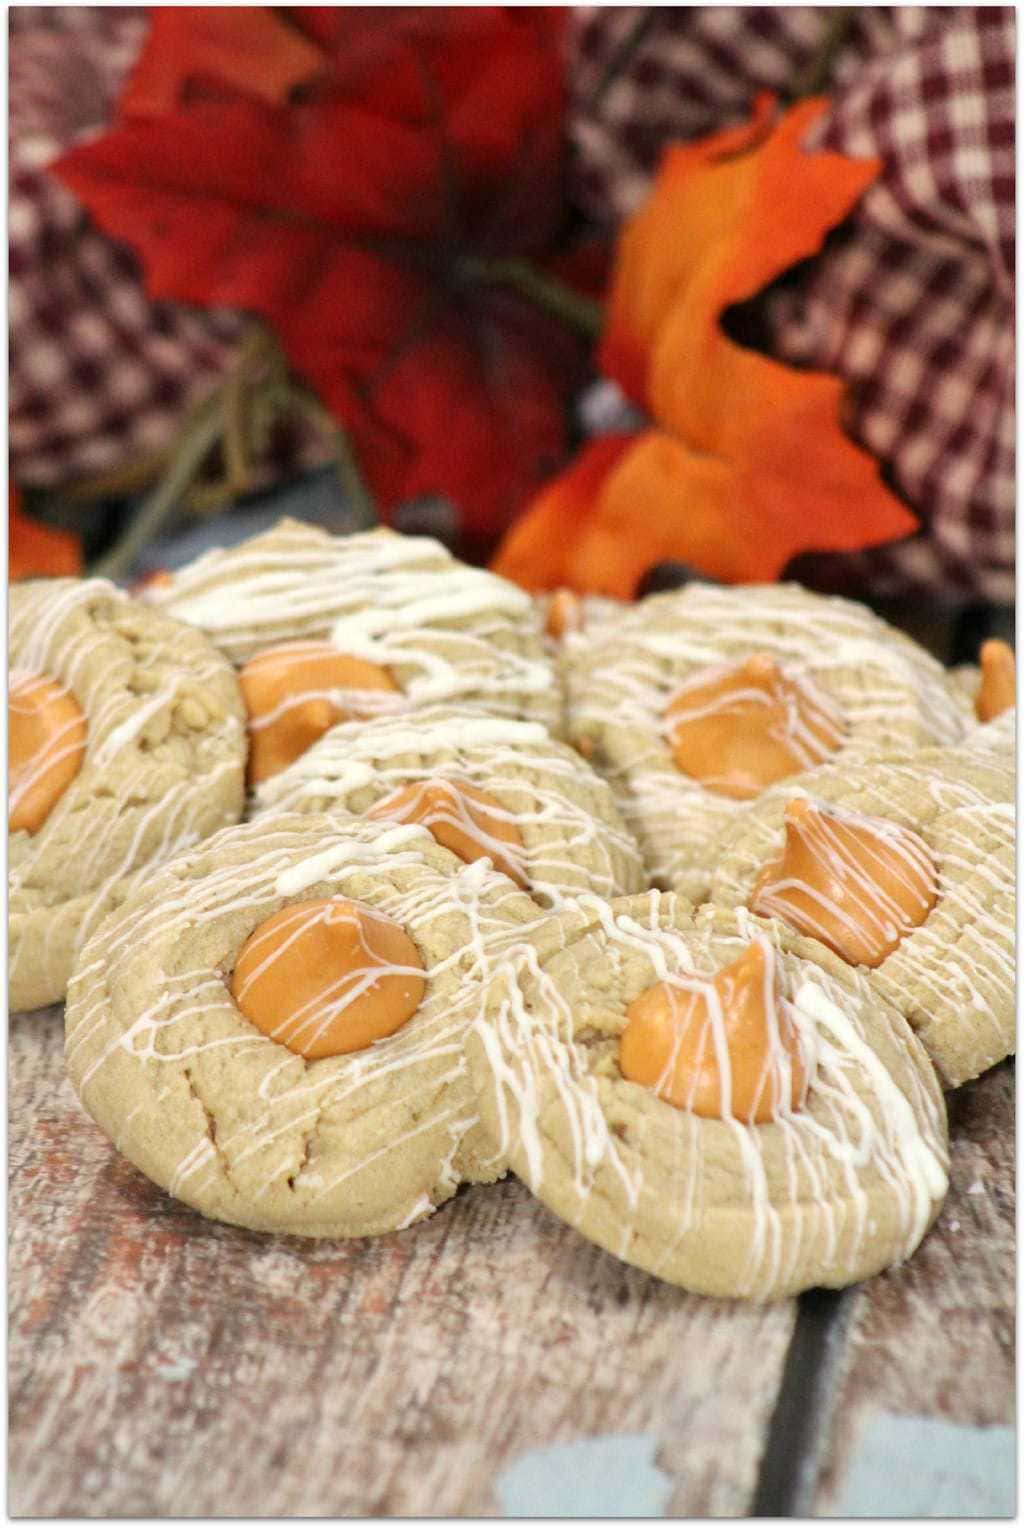 These Peanut Butter and Pumpkin Spice Thumbprint Cookies are so much fun to make with family or friends. Though perfect for fall all the way through Christmas, this easy dessert can be served anytime of the year! The icing makes these cookies look so special, but it's such an easy recipe! Looking for something different for that cookie exchange? You’ve found it!